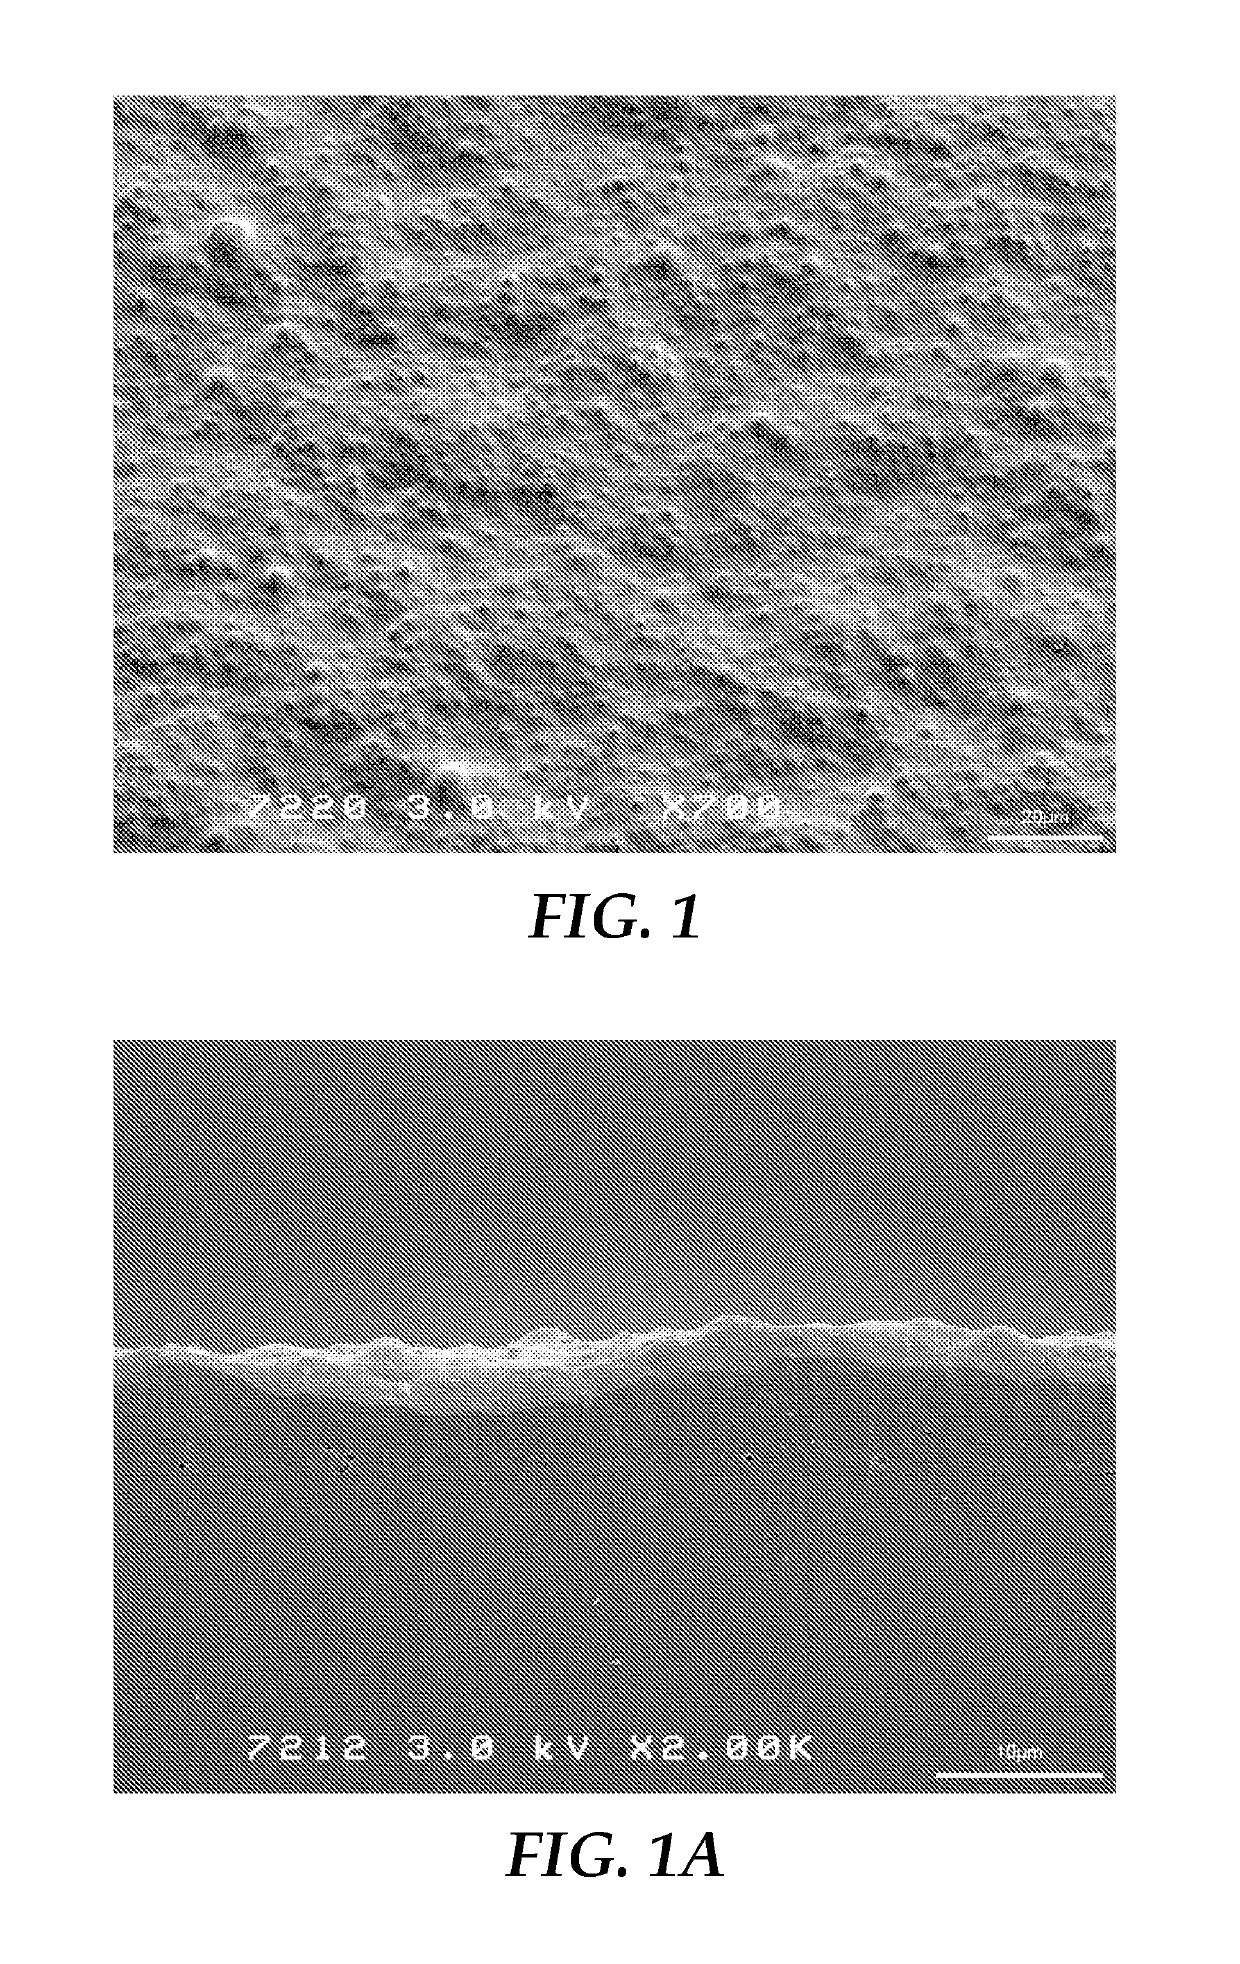 Optical diffusing films and methods of making same